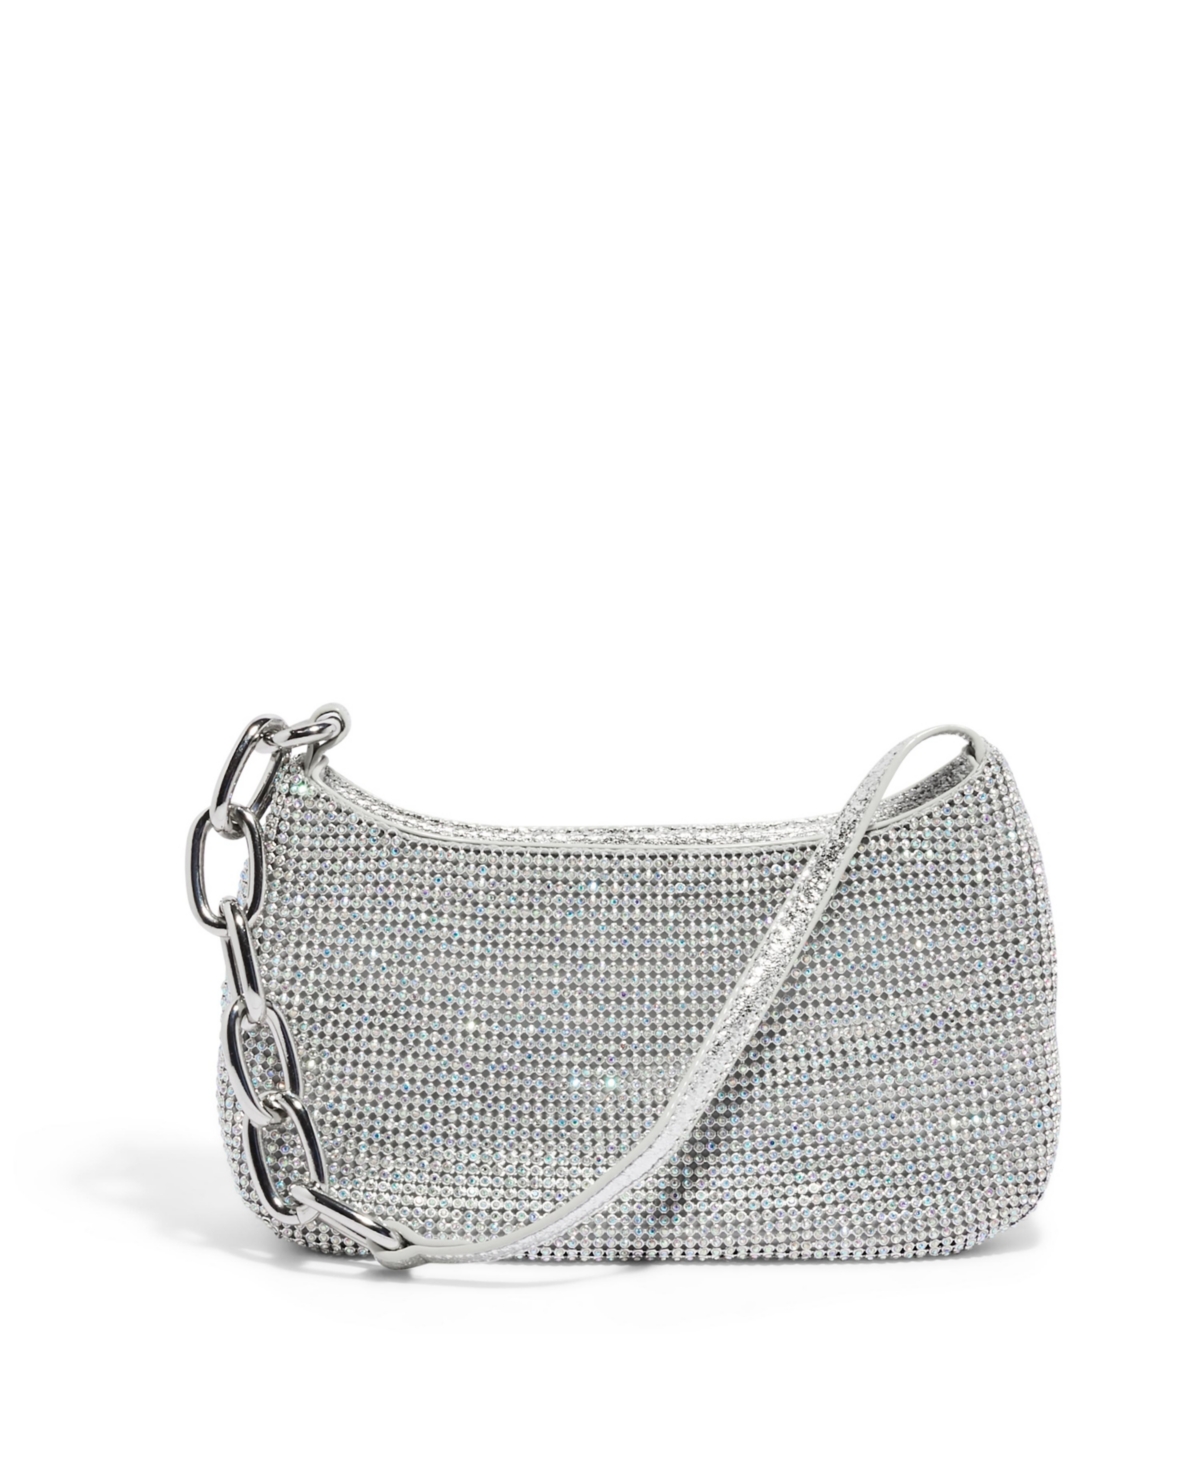 H.o.w Newbie Baguette Shoulder Bag - Winter white with pearls